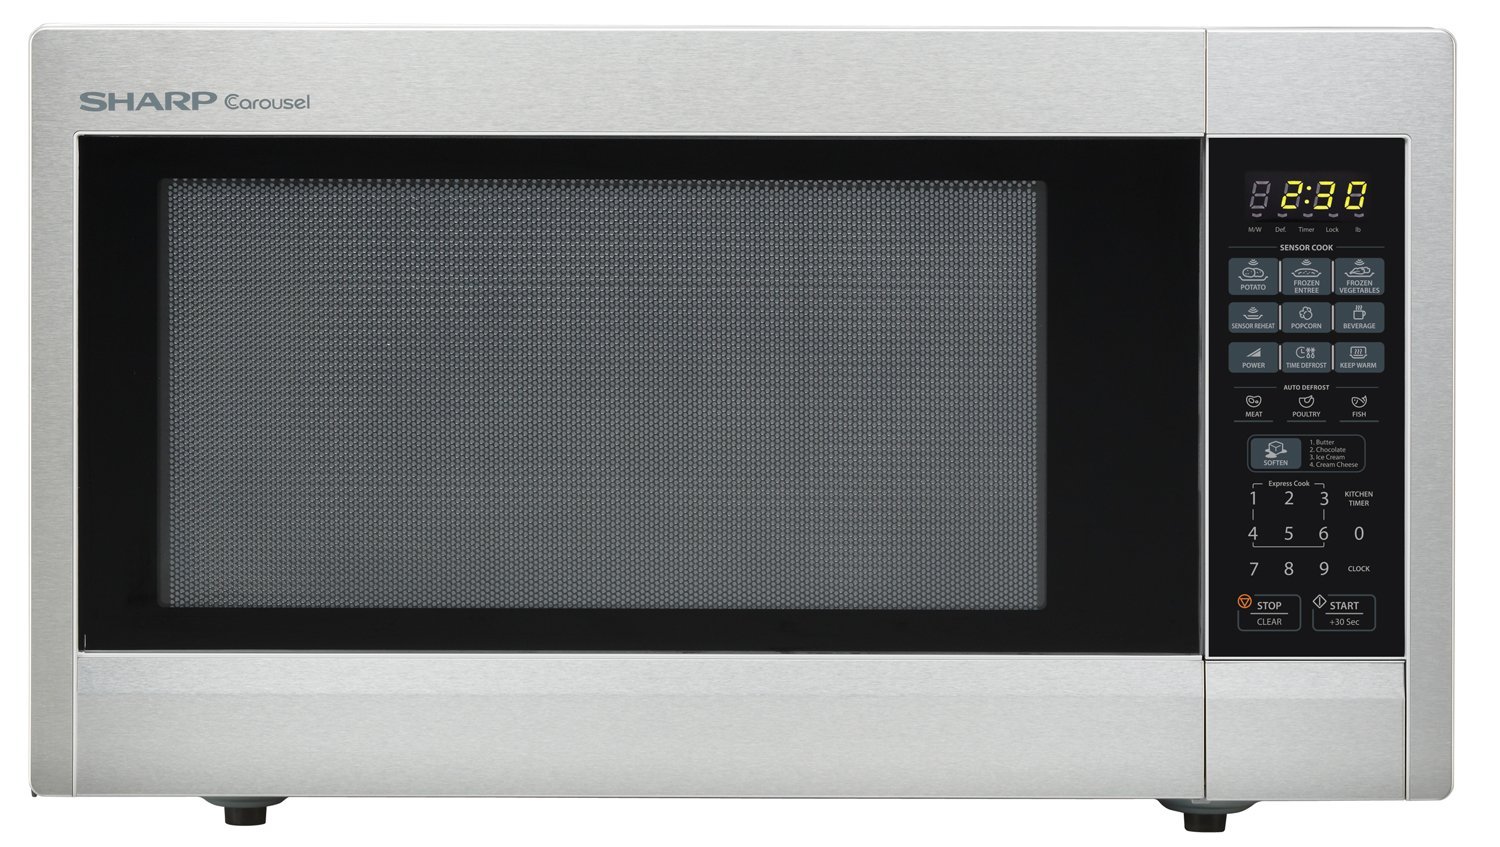 Sharp Countertop Microwave Oven ZR651ZS 2.2 cu. ft. 1200W Stainless Steel with Sensor Cooking